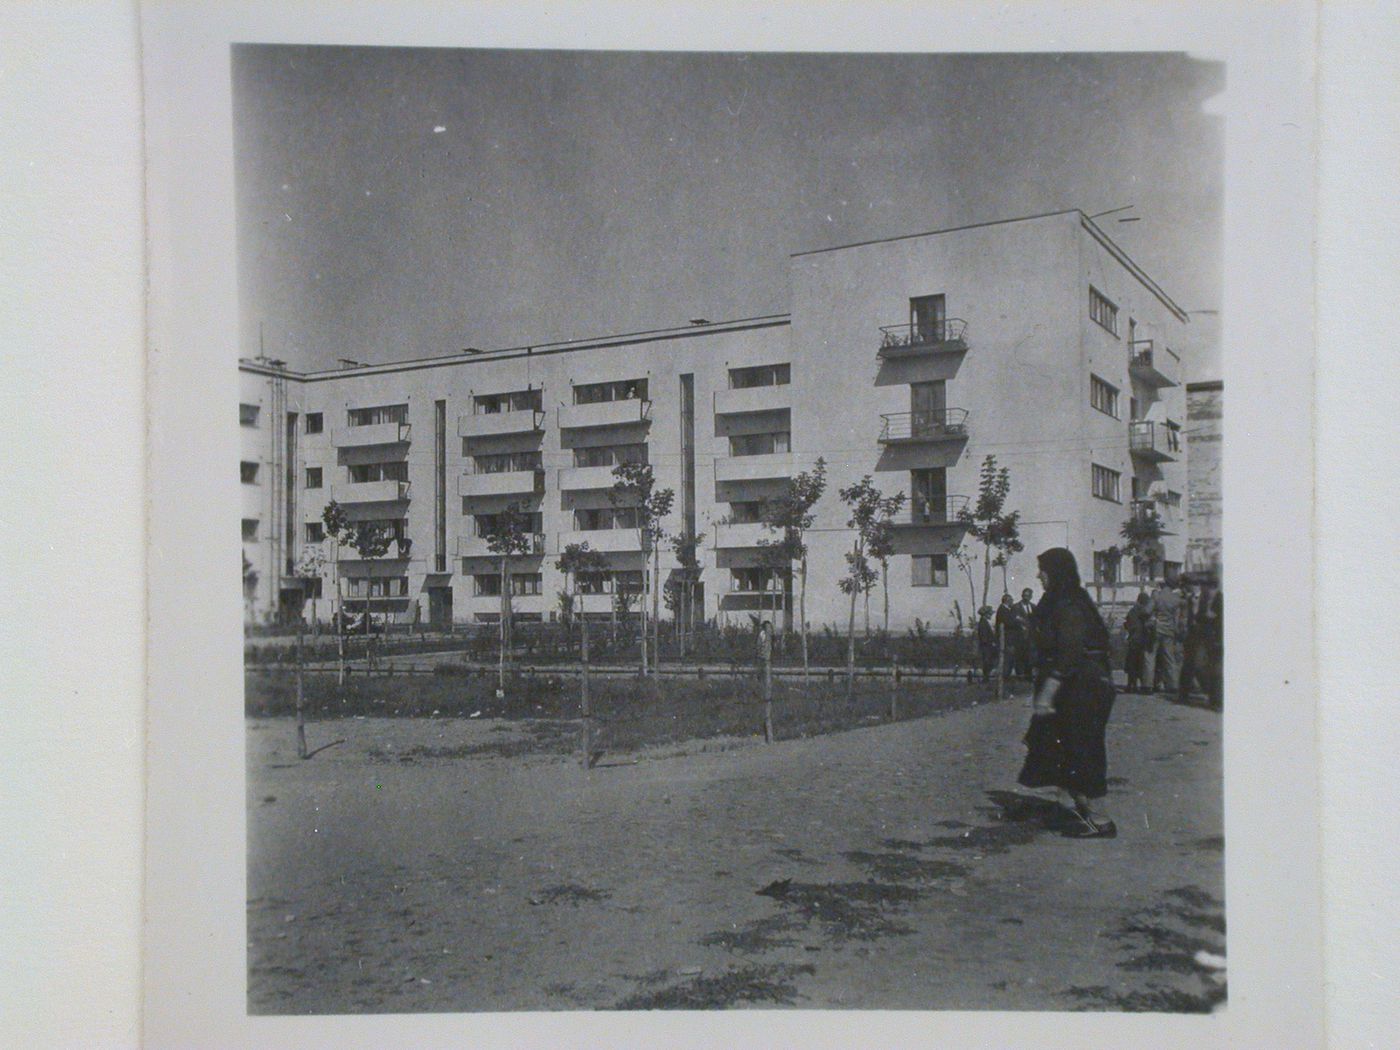 Exterior view of communal housing, Moscow